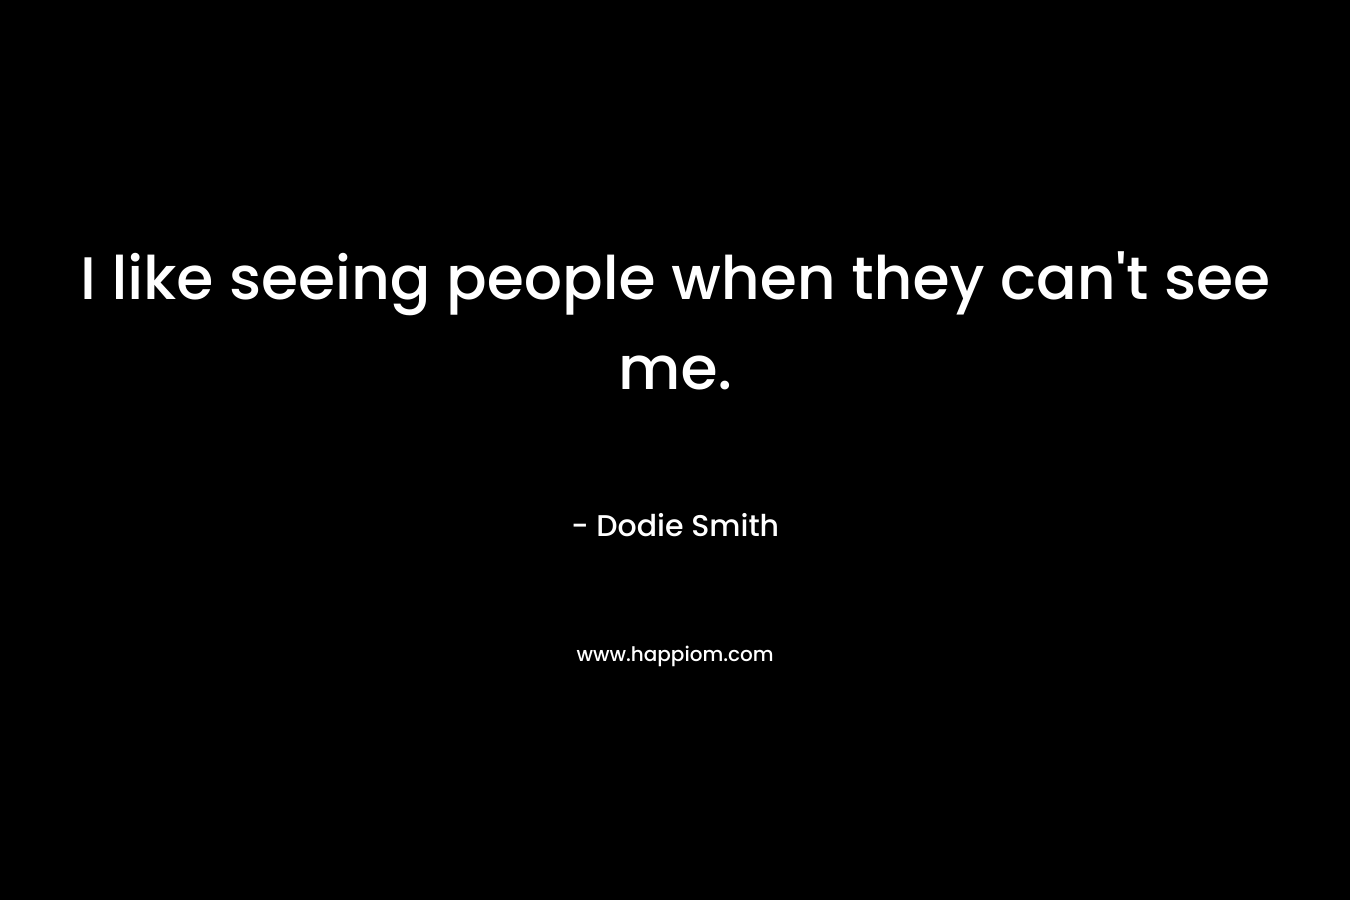 I like seeing people when they can't see me.